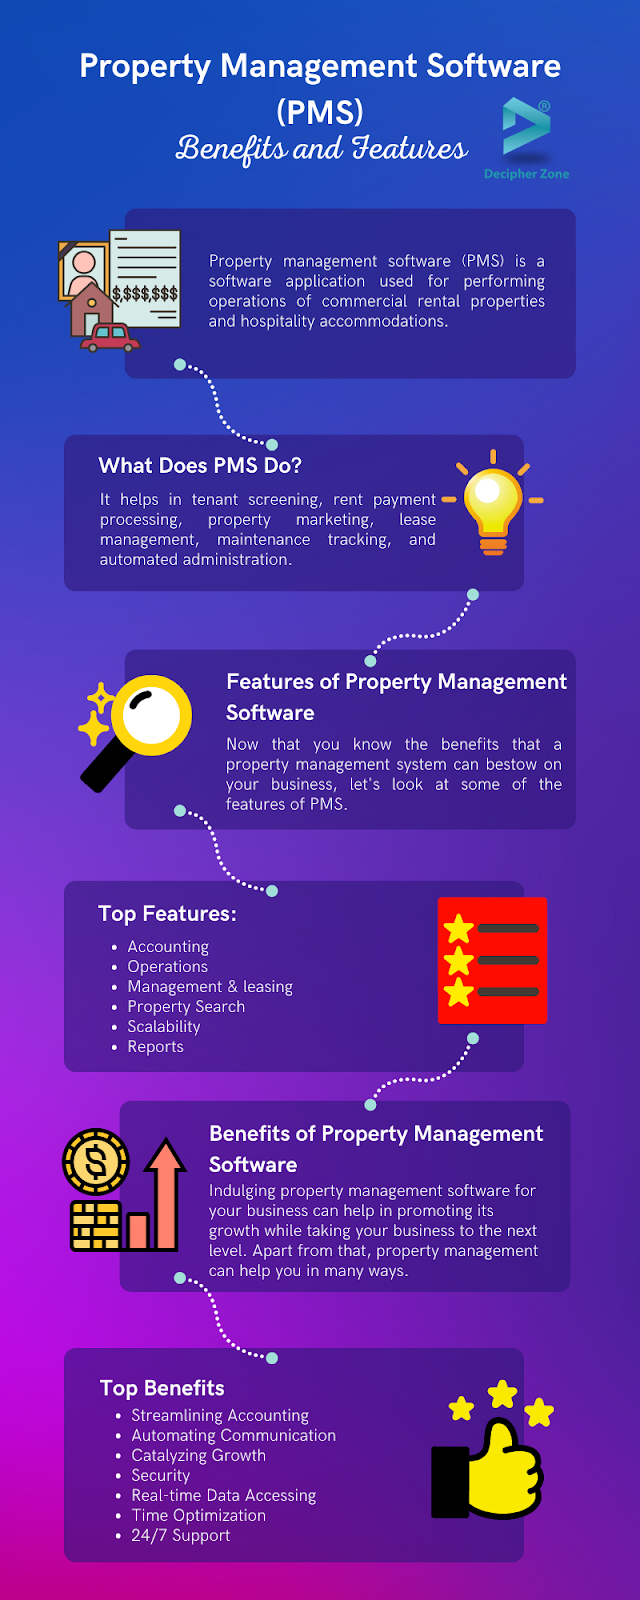 Property Management Software- Features and Benefits